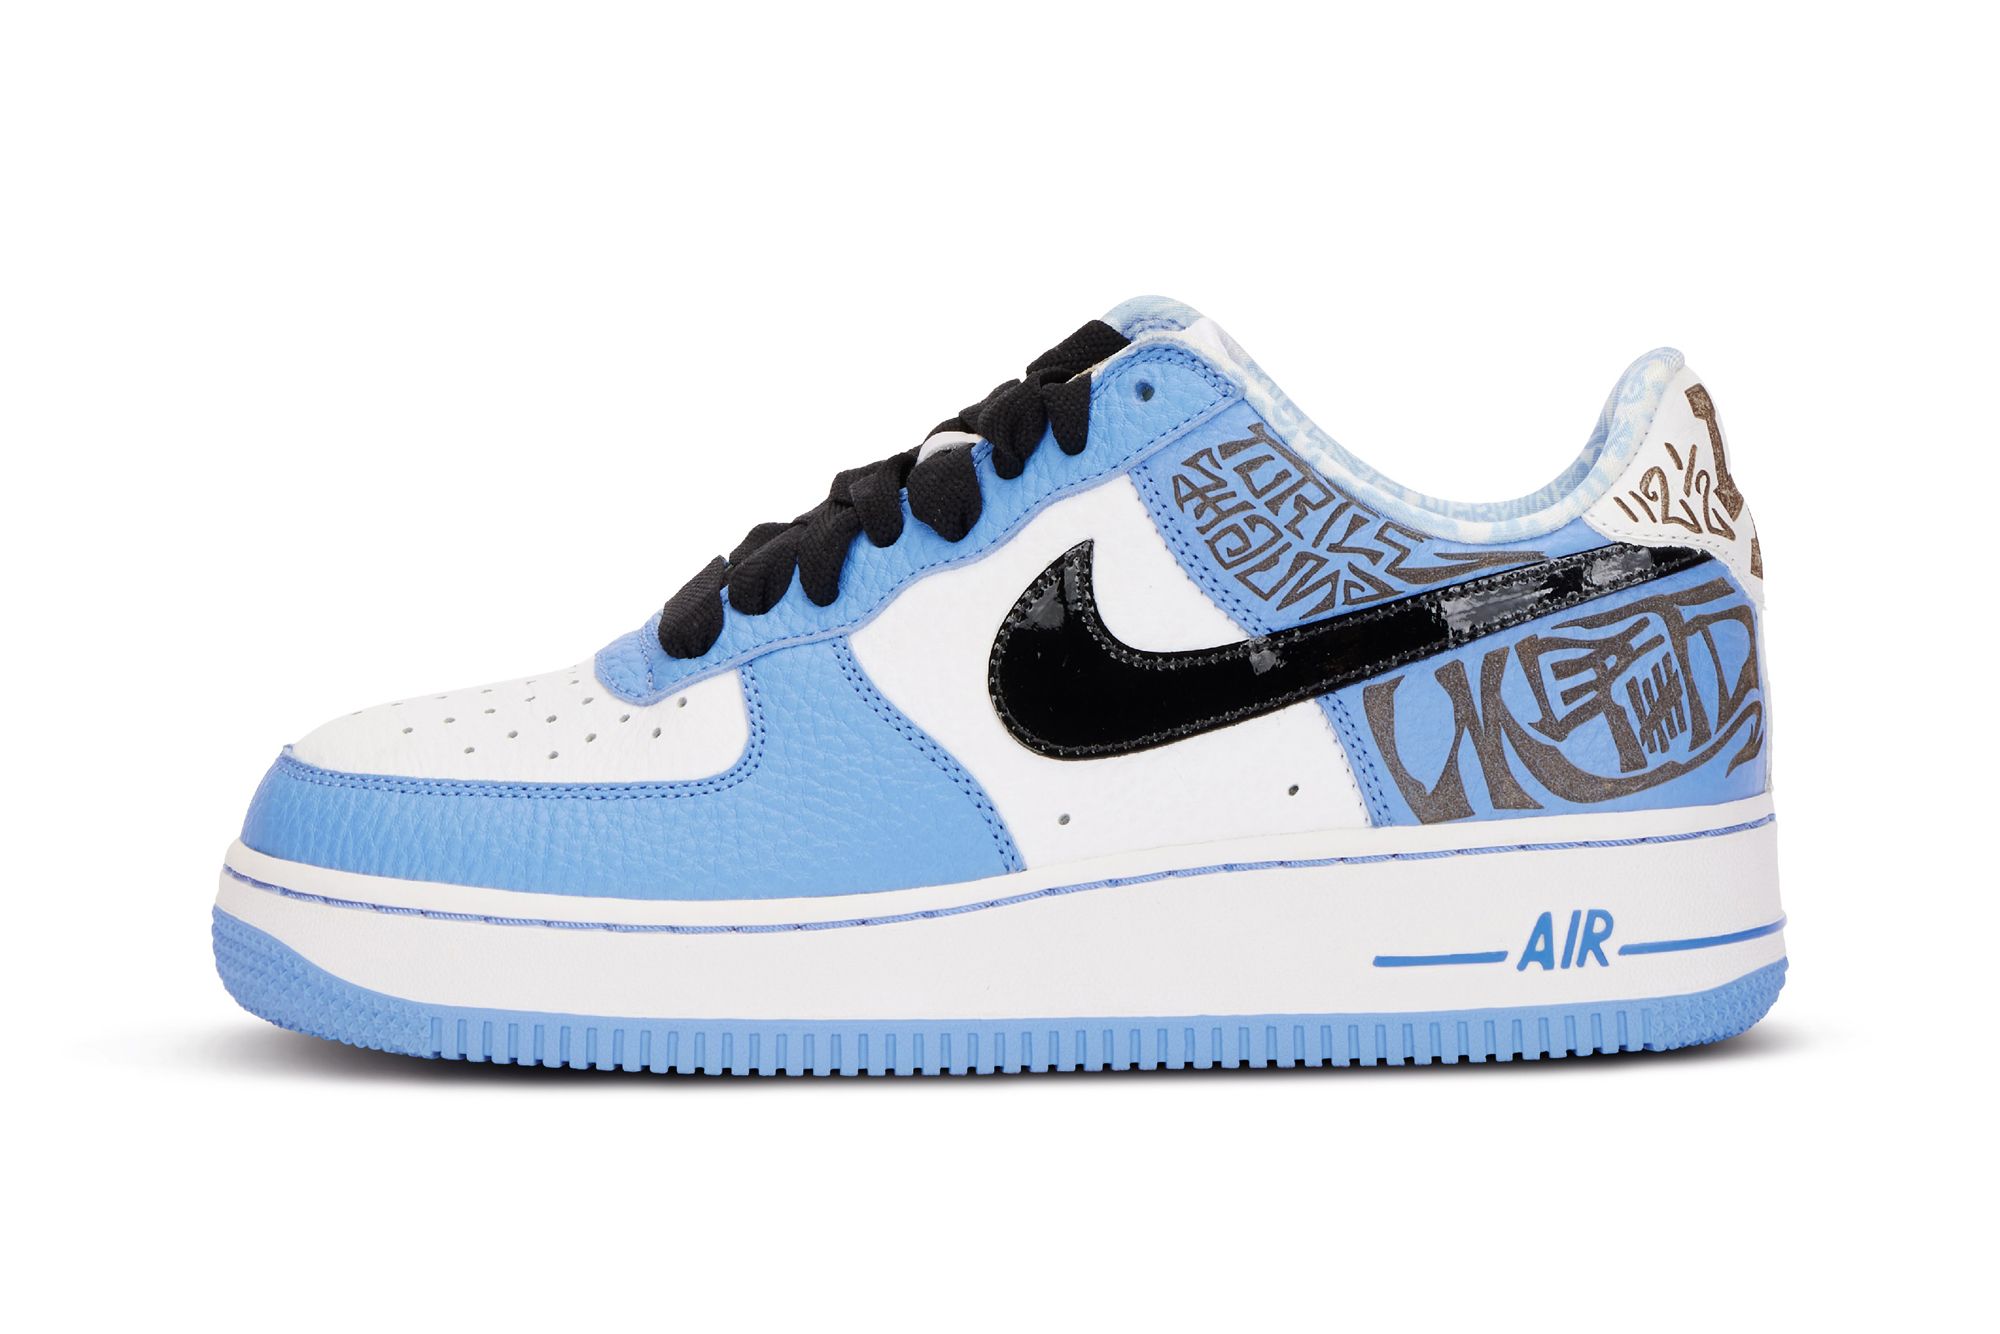 UNDEFEATED x Nike Air Force 1 Low 'Premium Georges'